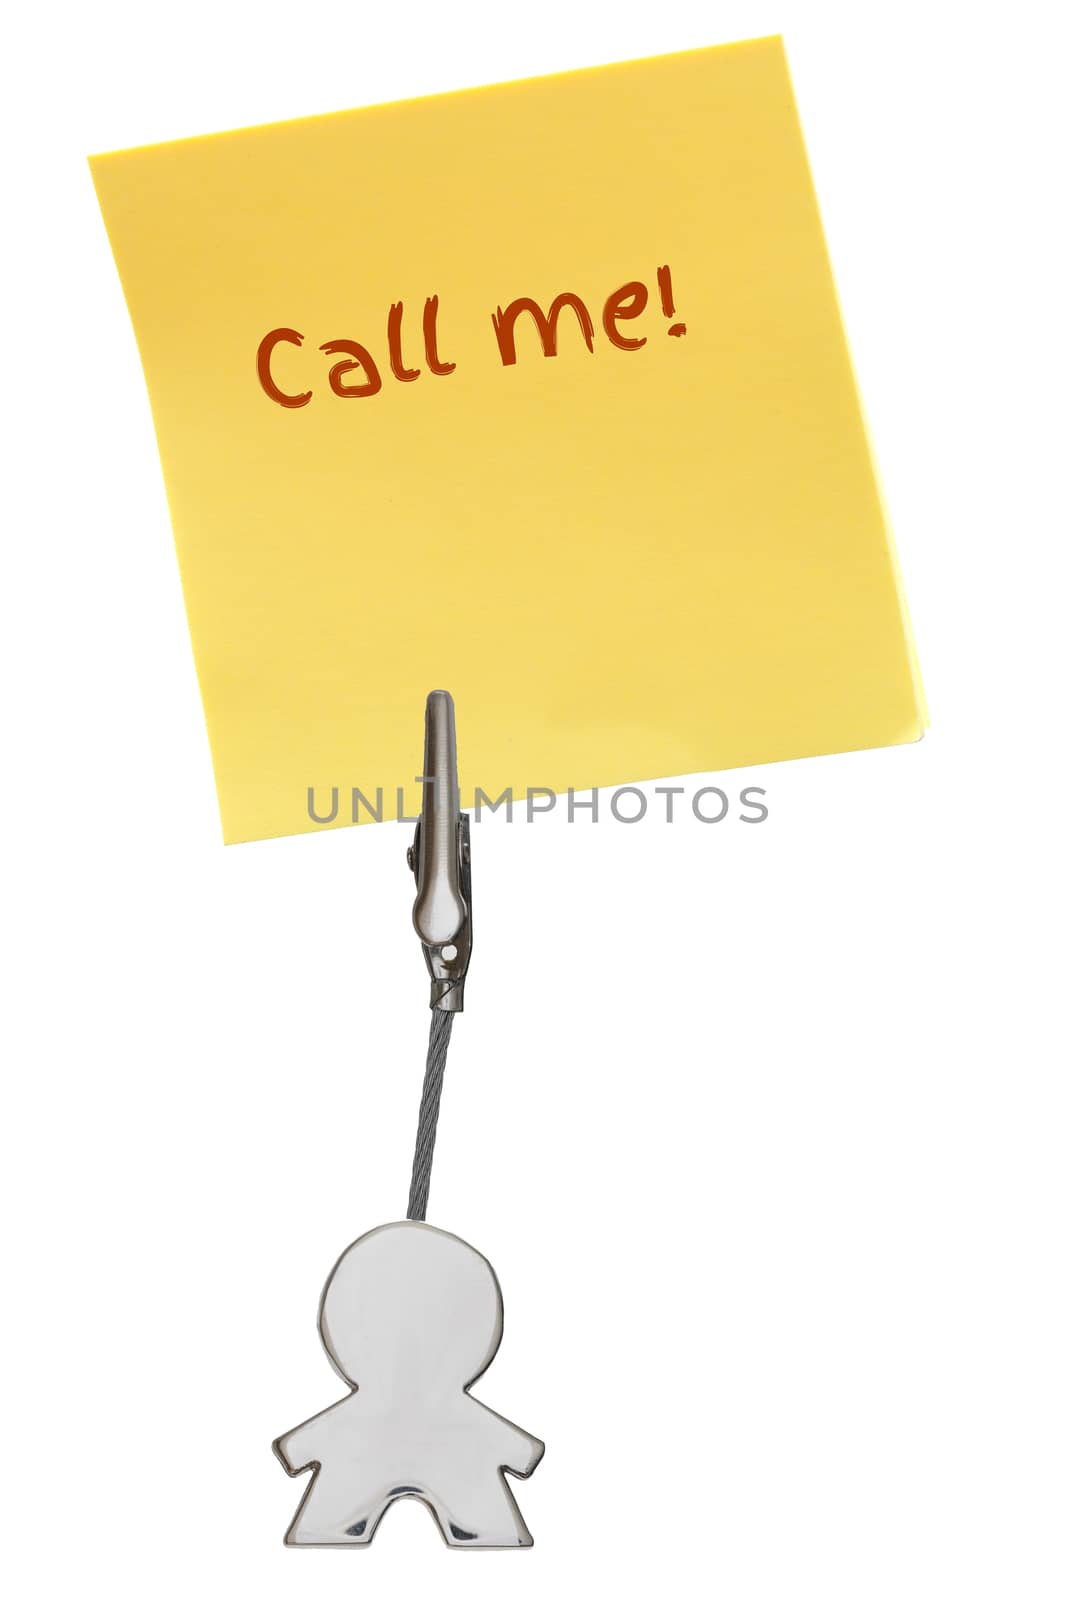 Man Figure Business Card Holder with clip holding a yellow paper note Call me; isolated on white background, customizable